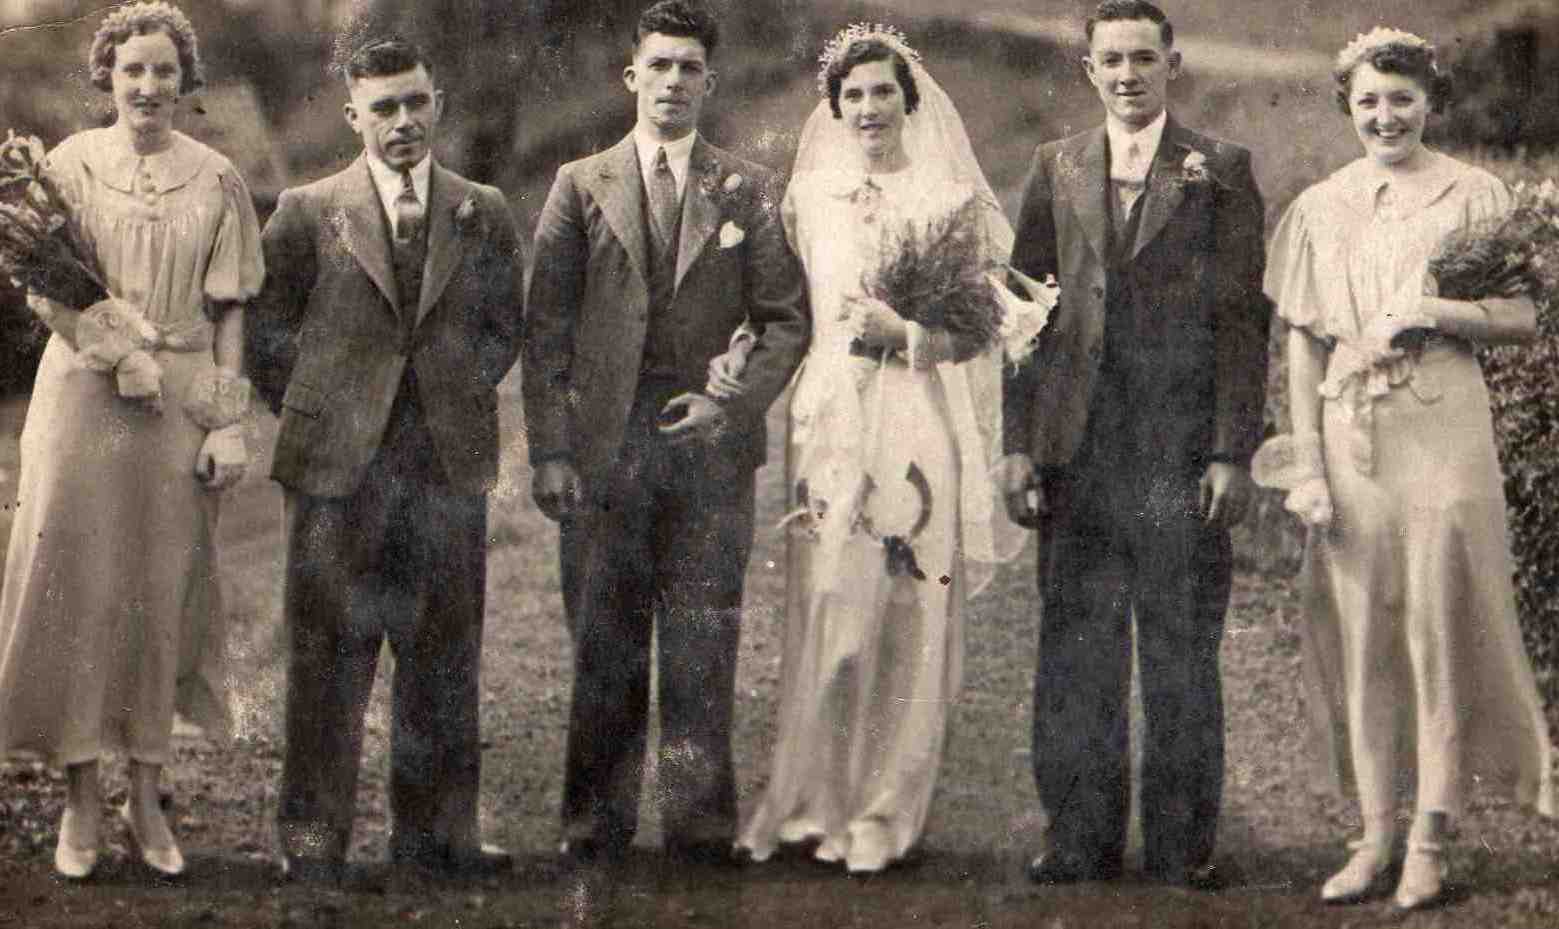  - Johnny-Whitfield-and-Rose-Morris-wedding.-L-r-Unknown-Dennis-Whitfield-Bride-and-Groom-Unknown-Irene-Marsh.-Photo-courtesy-of-Doreen-Wheelhouse-nee-Windle